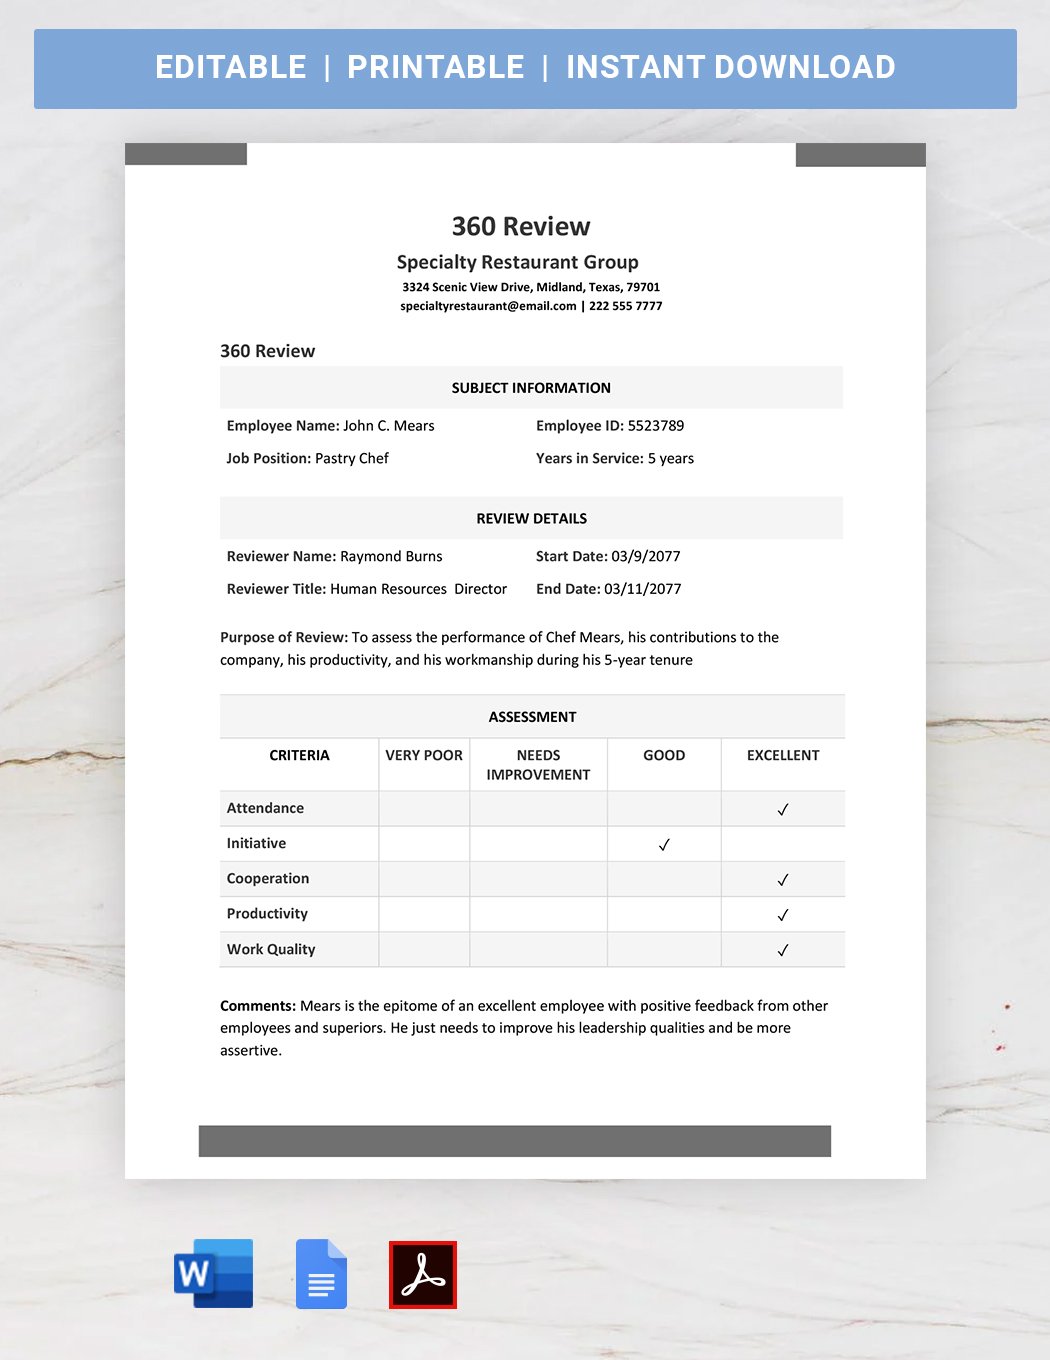 360 Review Template in Word, Google Docs